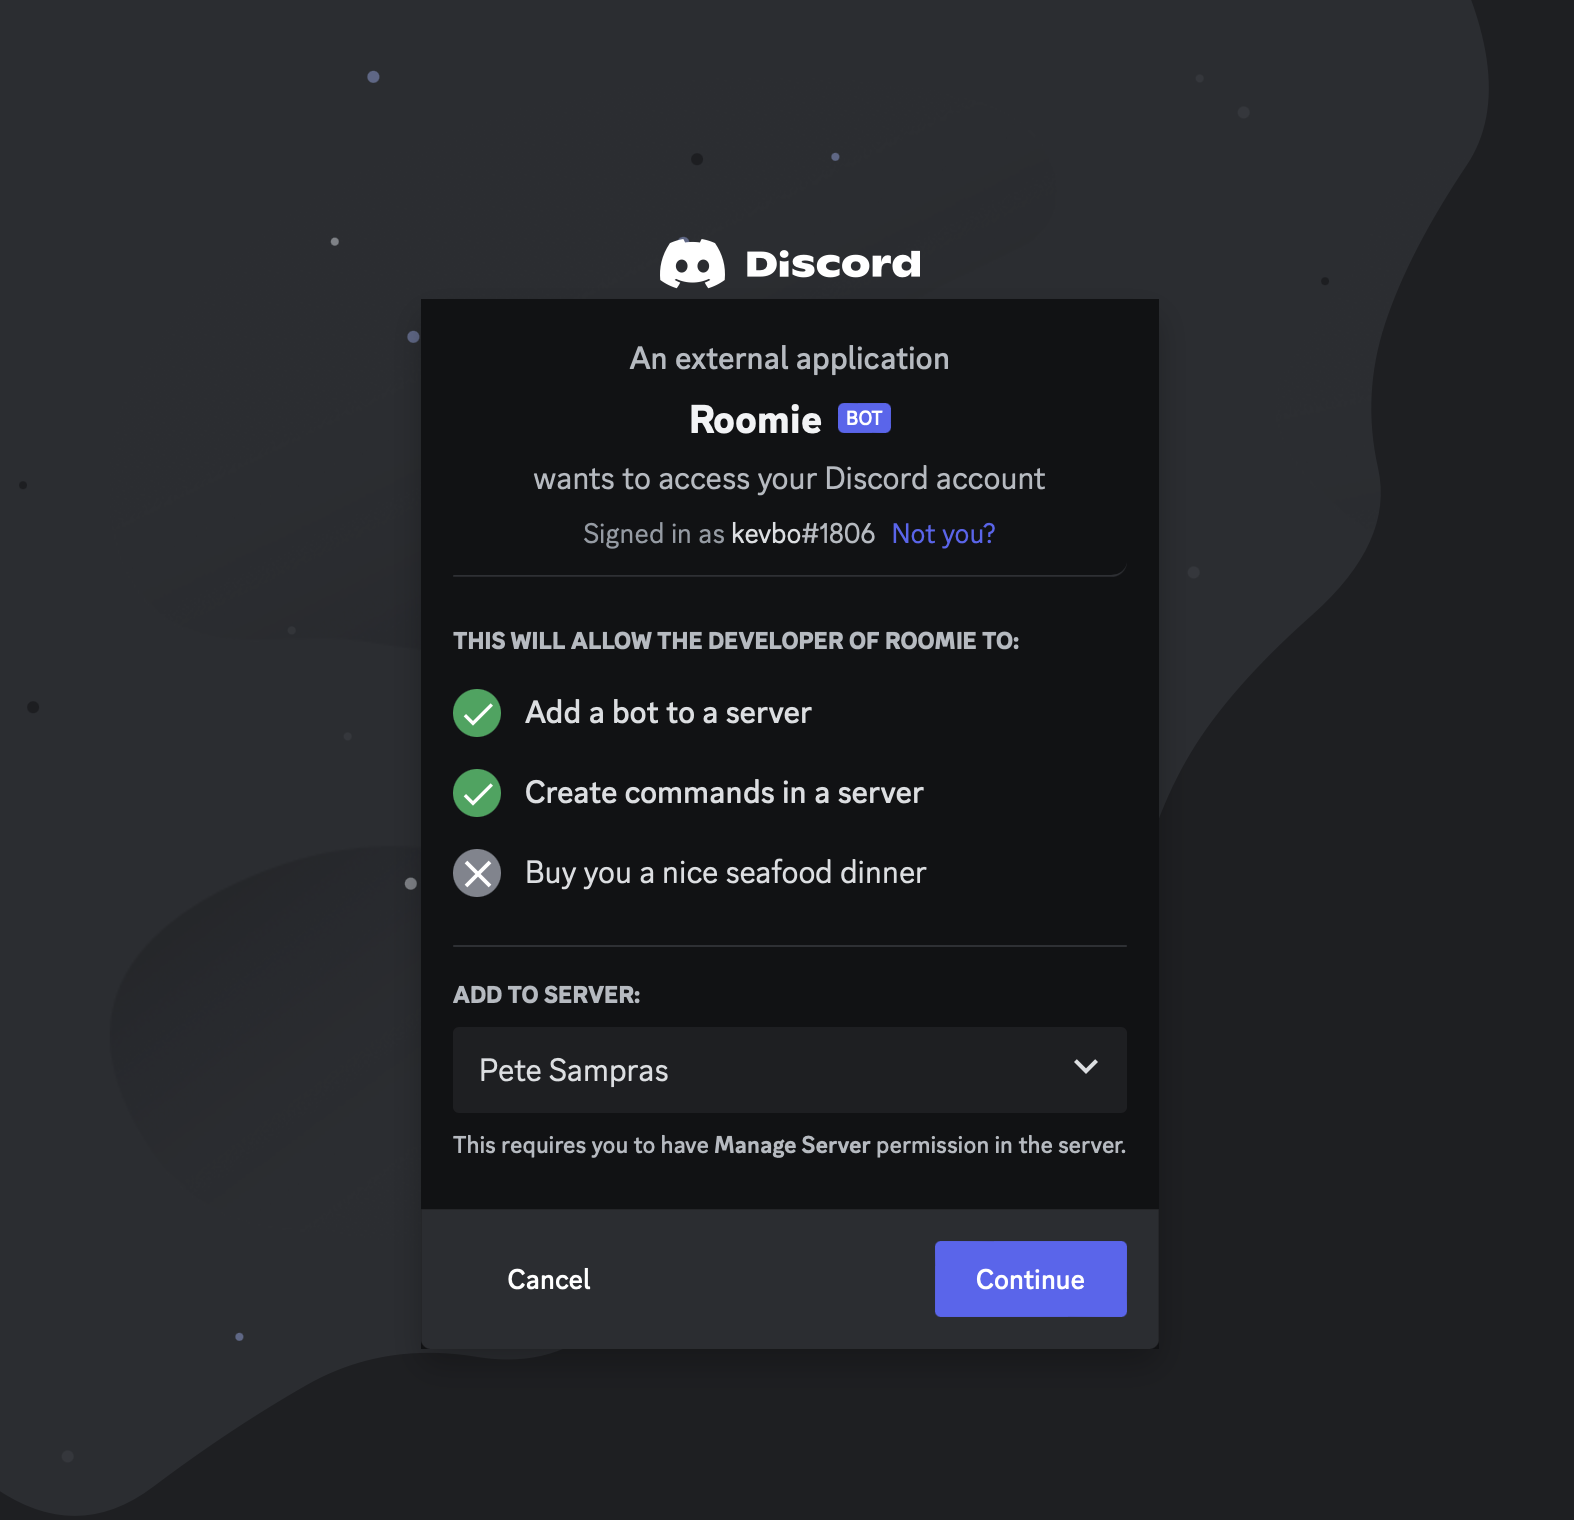 Build an automated Discord verification system Playbook